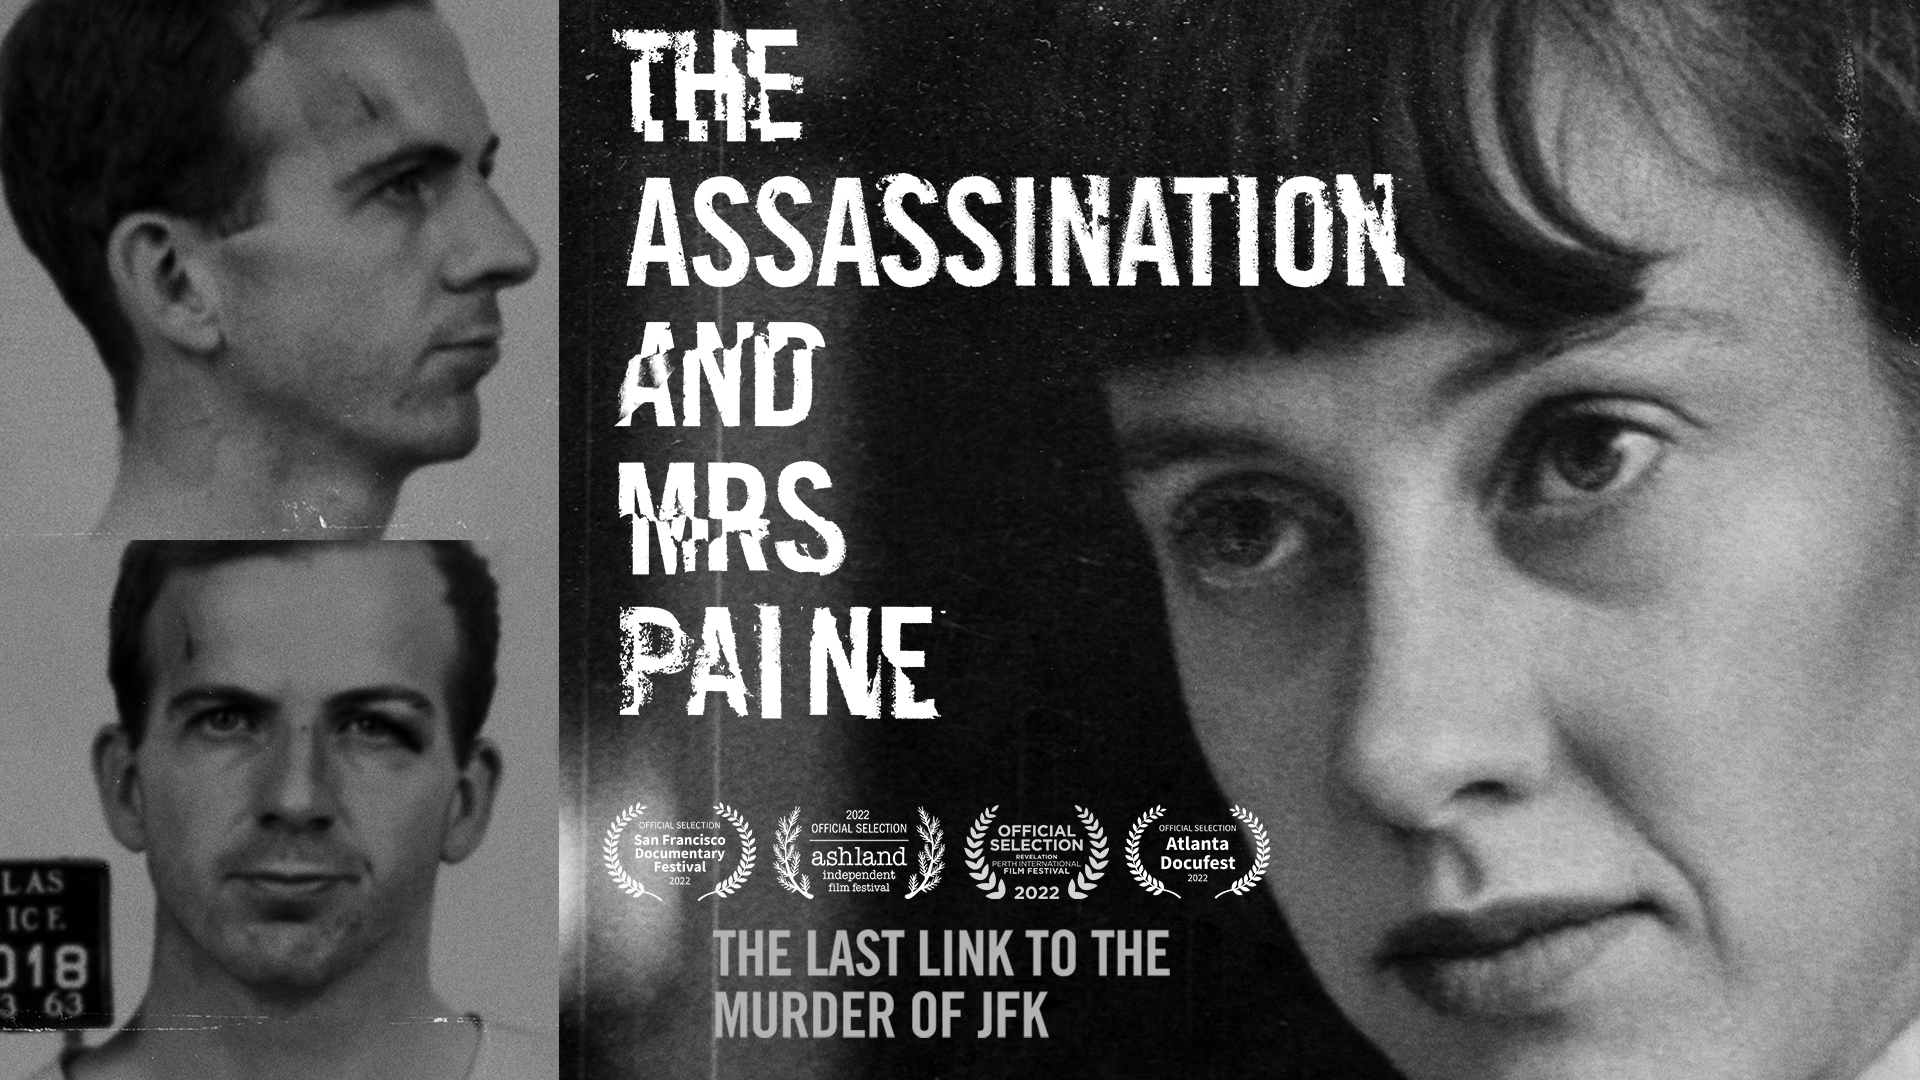 REVIEW: The Assassination and Mrs. Paine